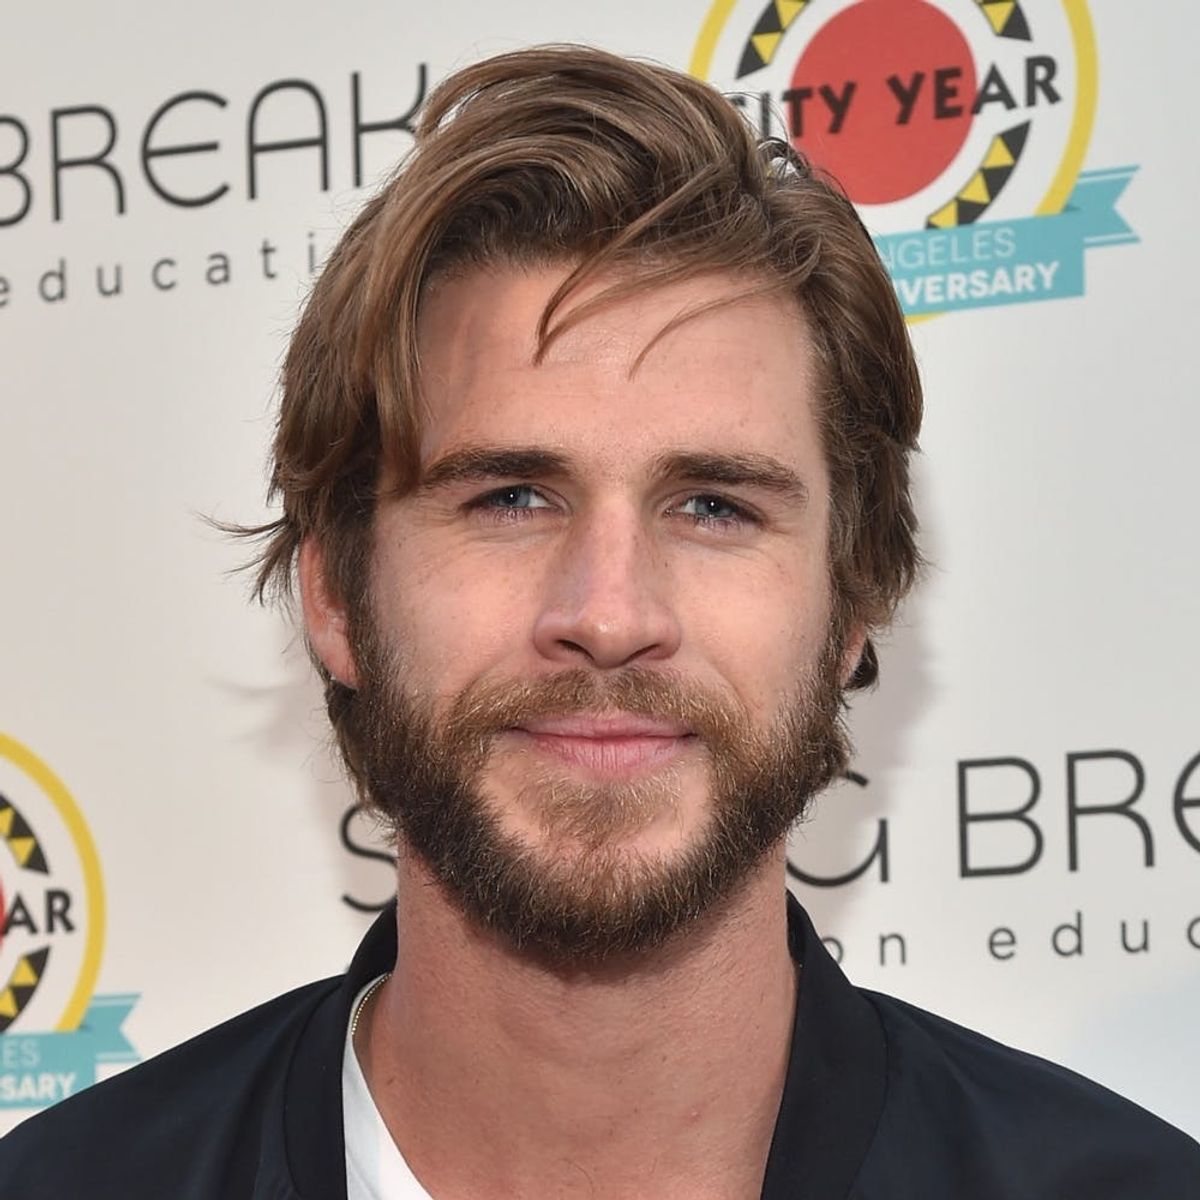 Liam Hemsworth Just Wore the Shortest Shorts Ever and the Internet Can’t Handle It